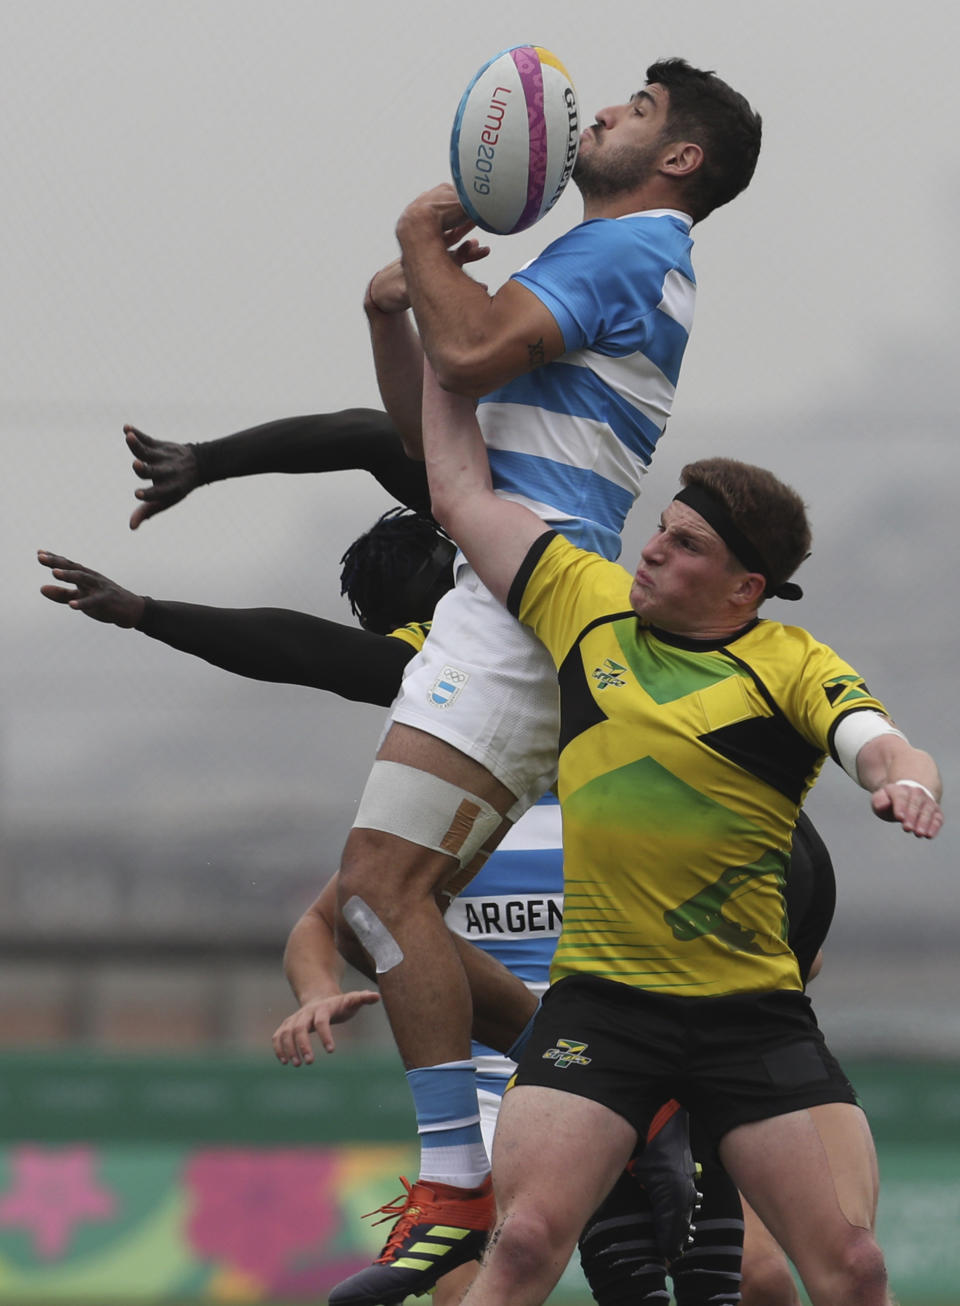 Dario Luna of Argentina, top, is tackled by Rhodri Adamson, right, of Jamaica during rugby seven match at the Pan Am Games in Lima, Peru, Friday, July 26, 2019. Argentina won the match 52-0. (AP Photo/Juan Karita)